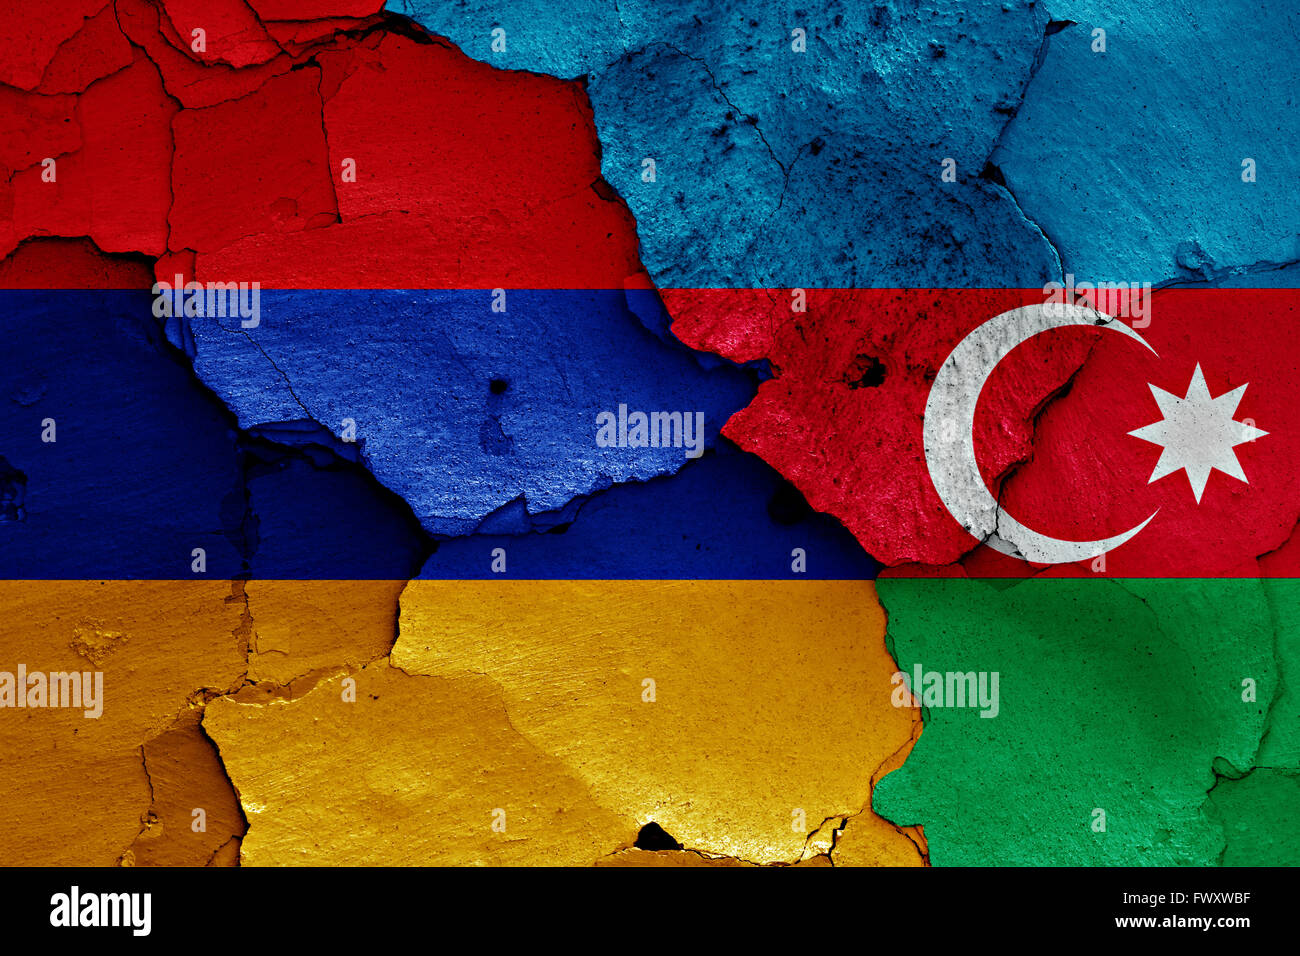 flags of Armenia and Azerbaijan painted on cracked wall Stock Photo